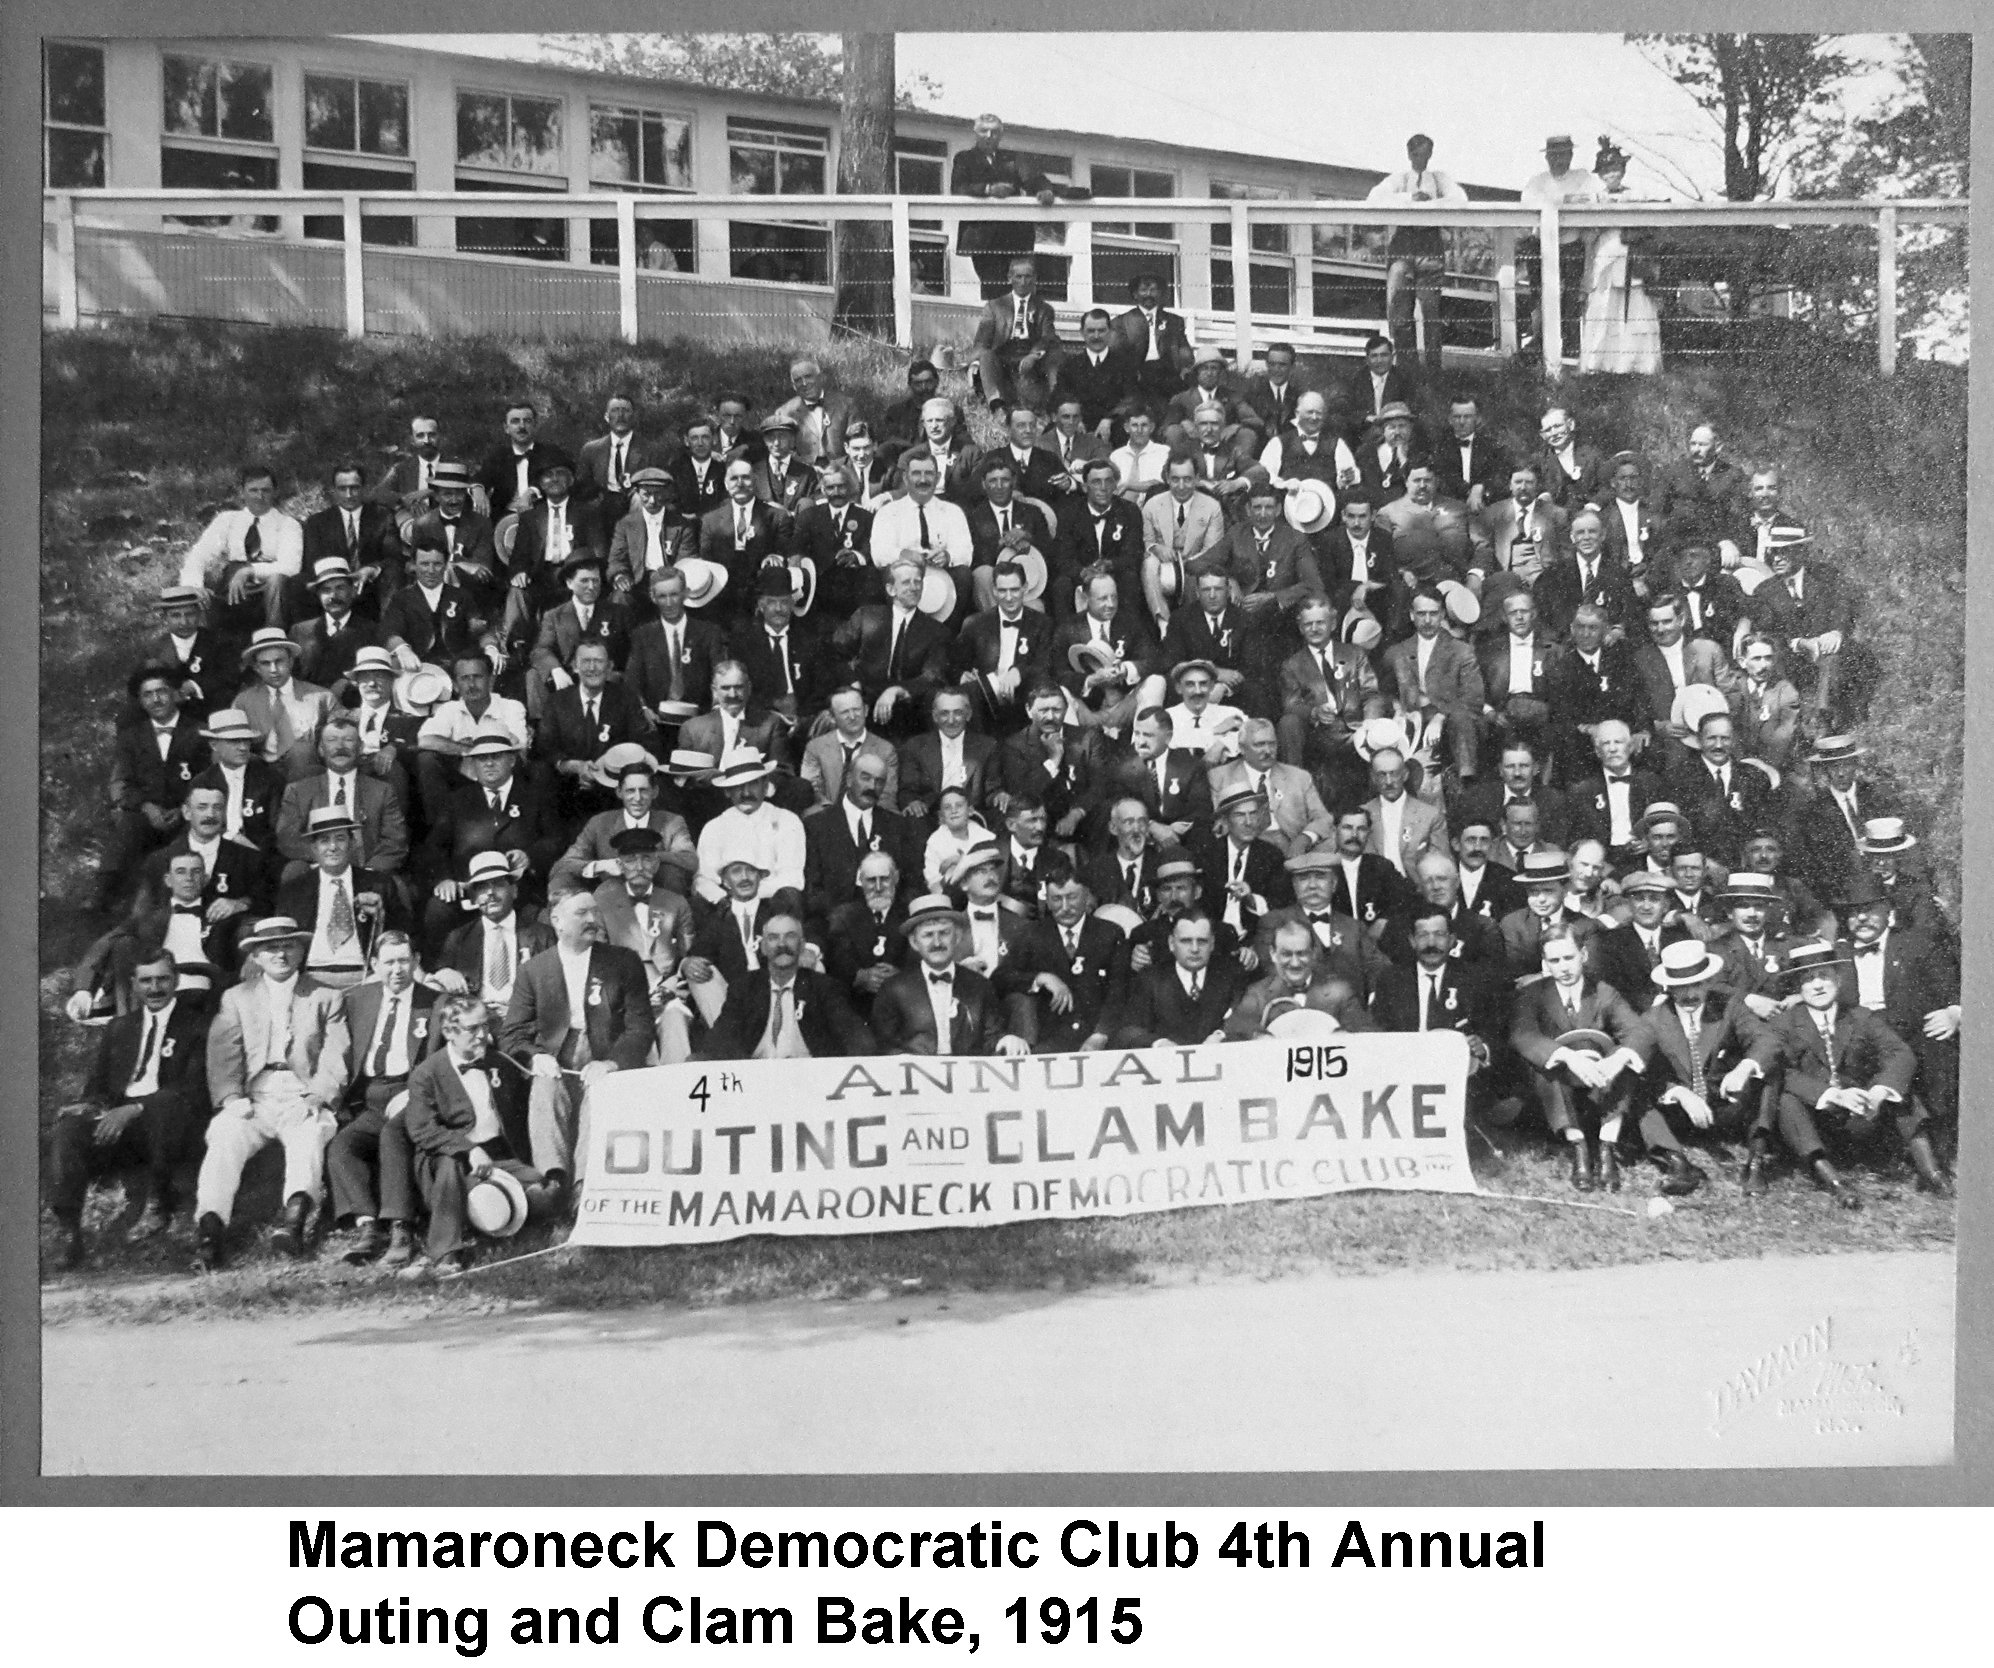 WD-30-A Mamaroneck Democratic Club 4th Annual Outing and Clam Bake 1915 captioned.jpg